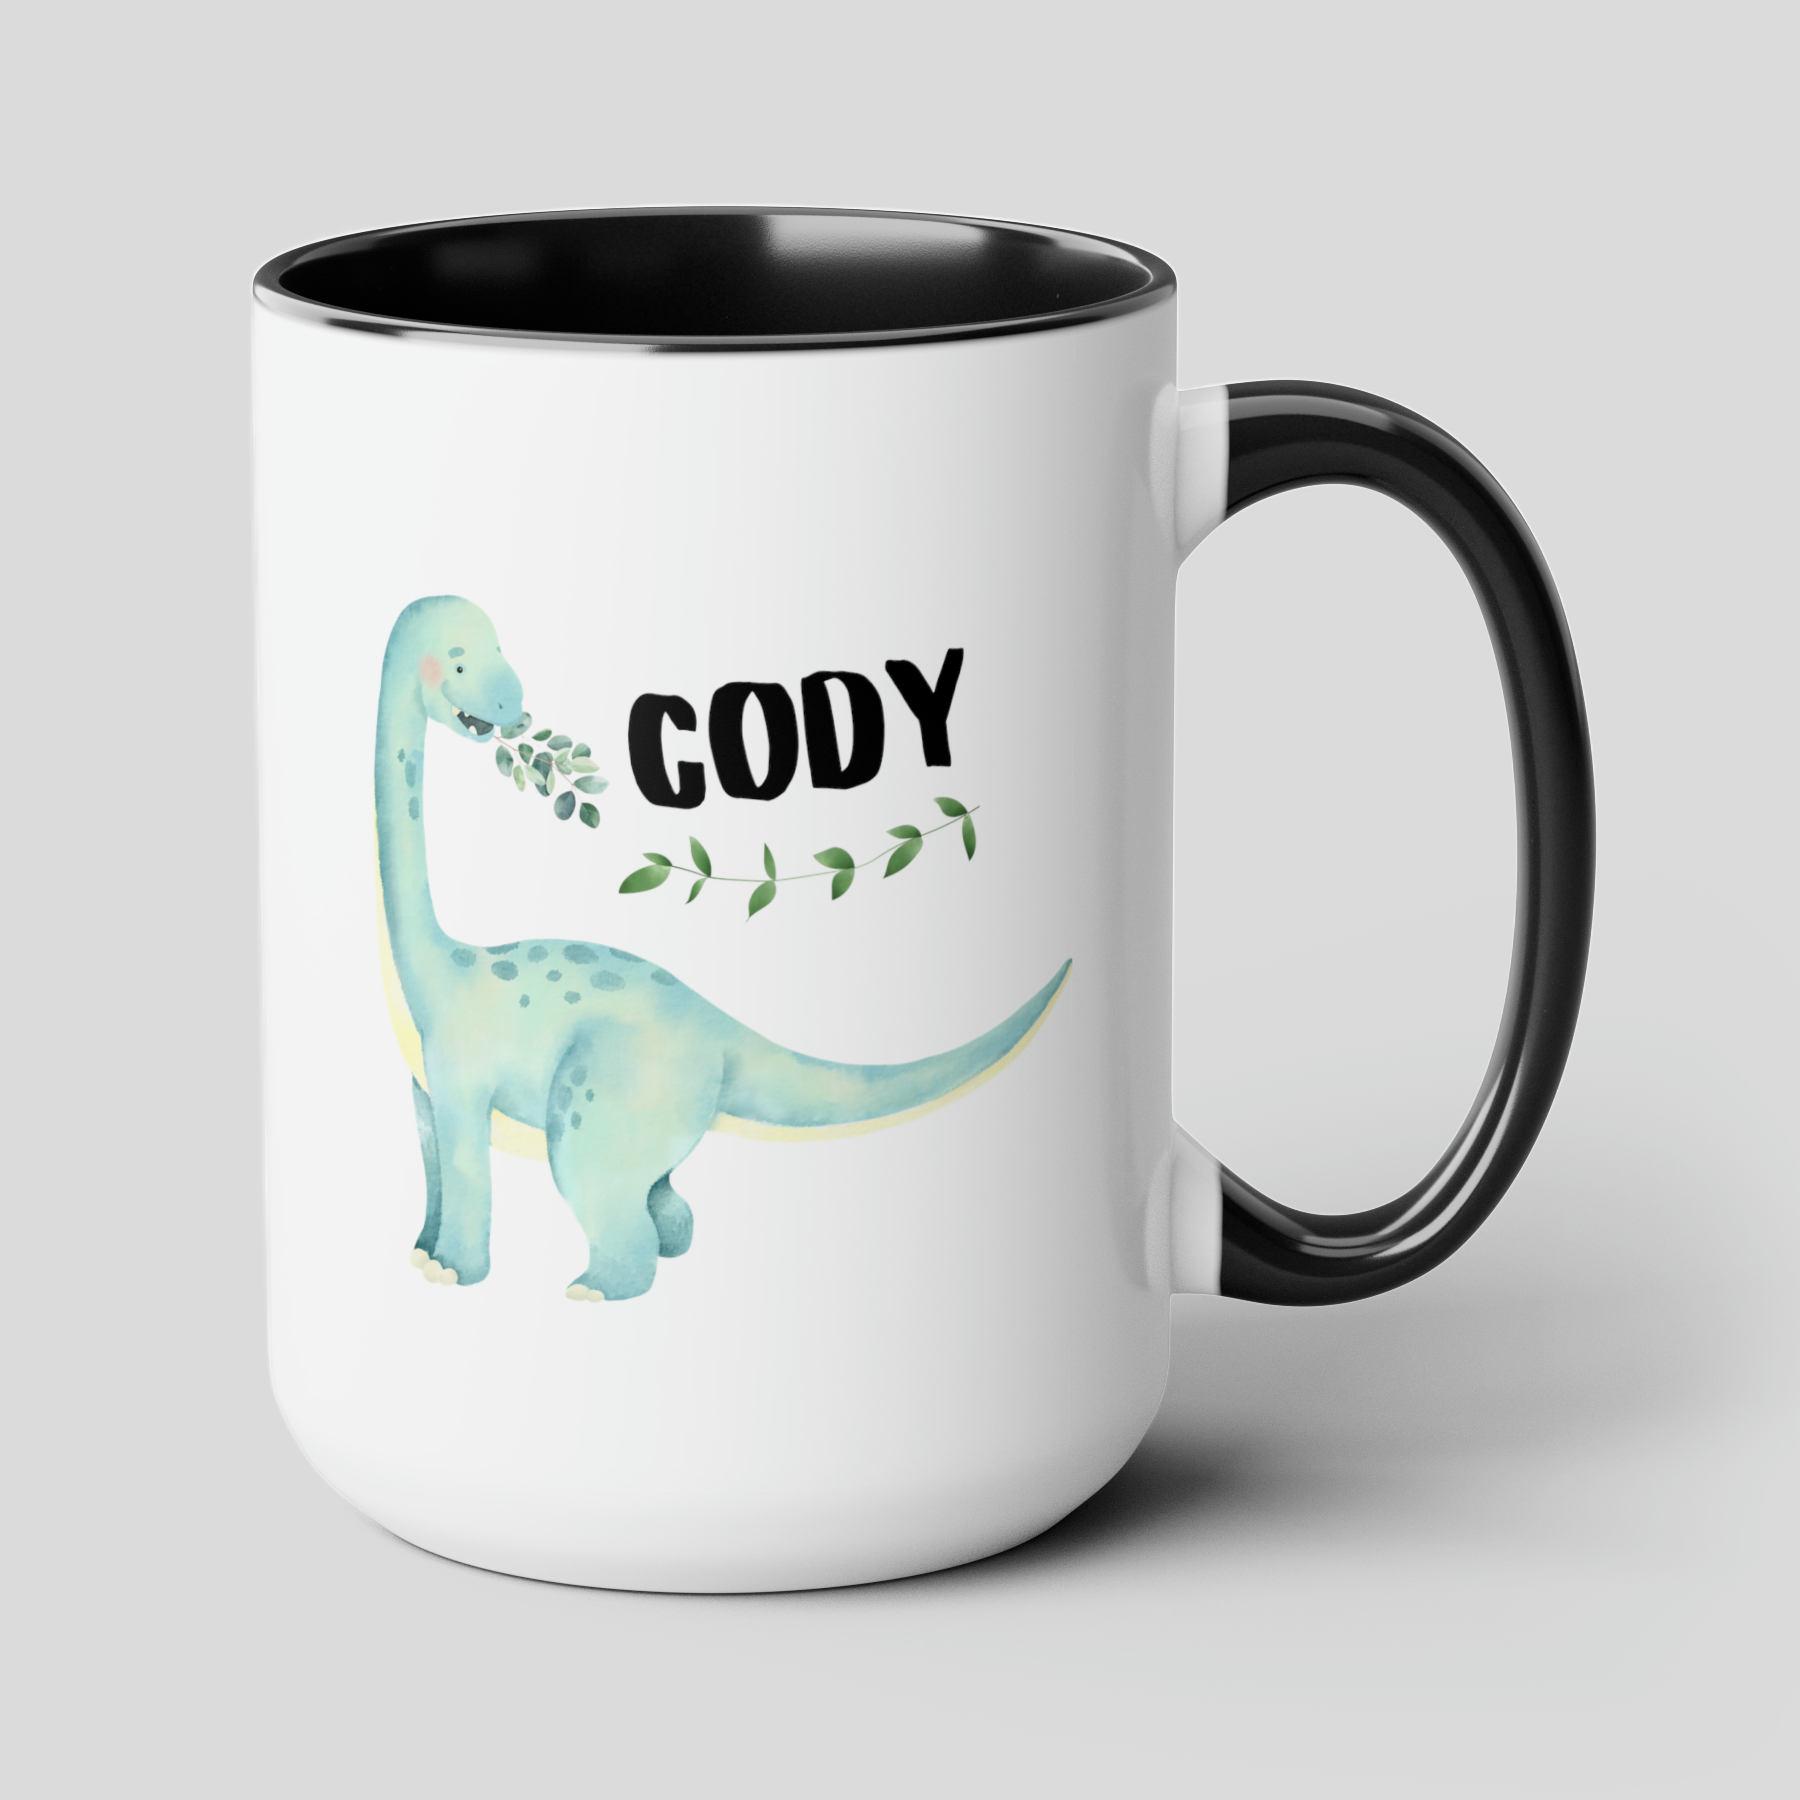 Dinosaur Name 15oz white with black accent funny large coffee mug gift for boys women mom kids customize personalize waveywares wavey wares wavywares wavy wares cover